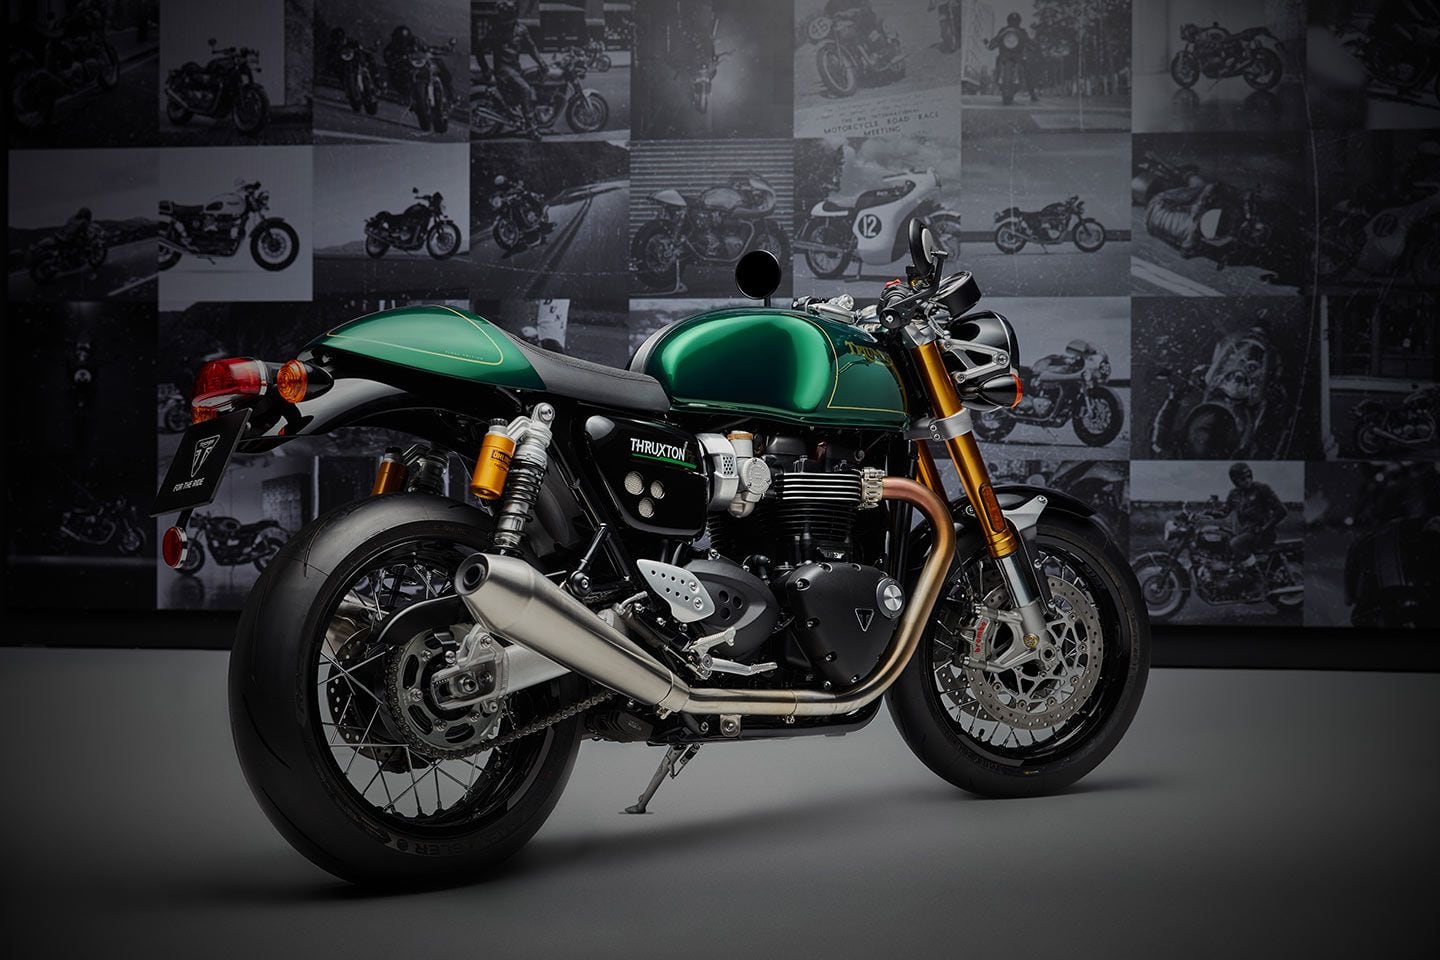 The Thruxton Final Edition shares most of its components with the Thruxton RS.